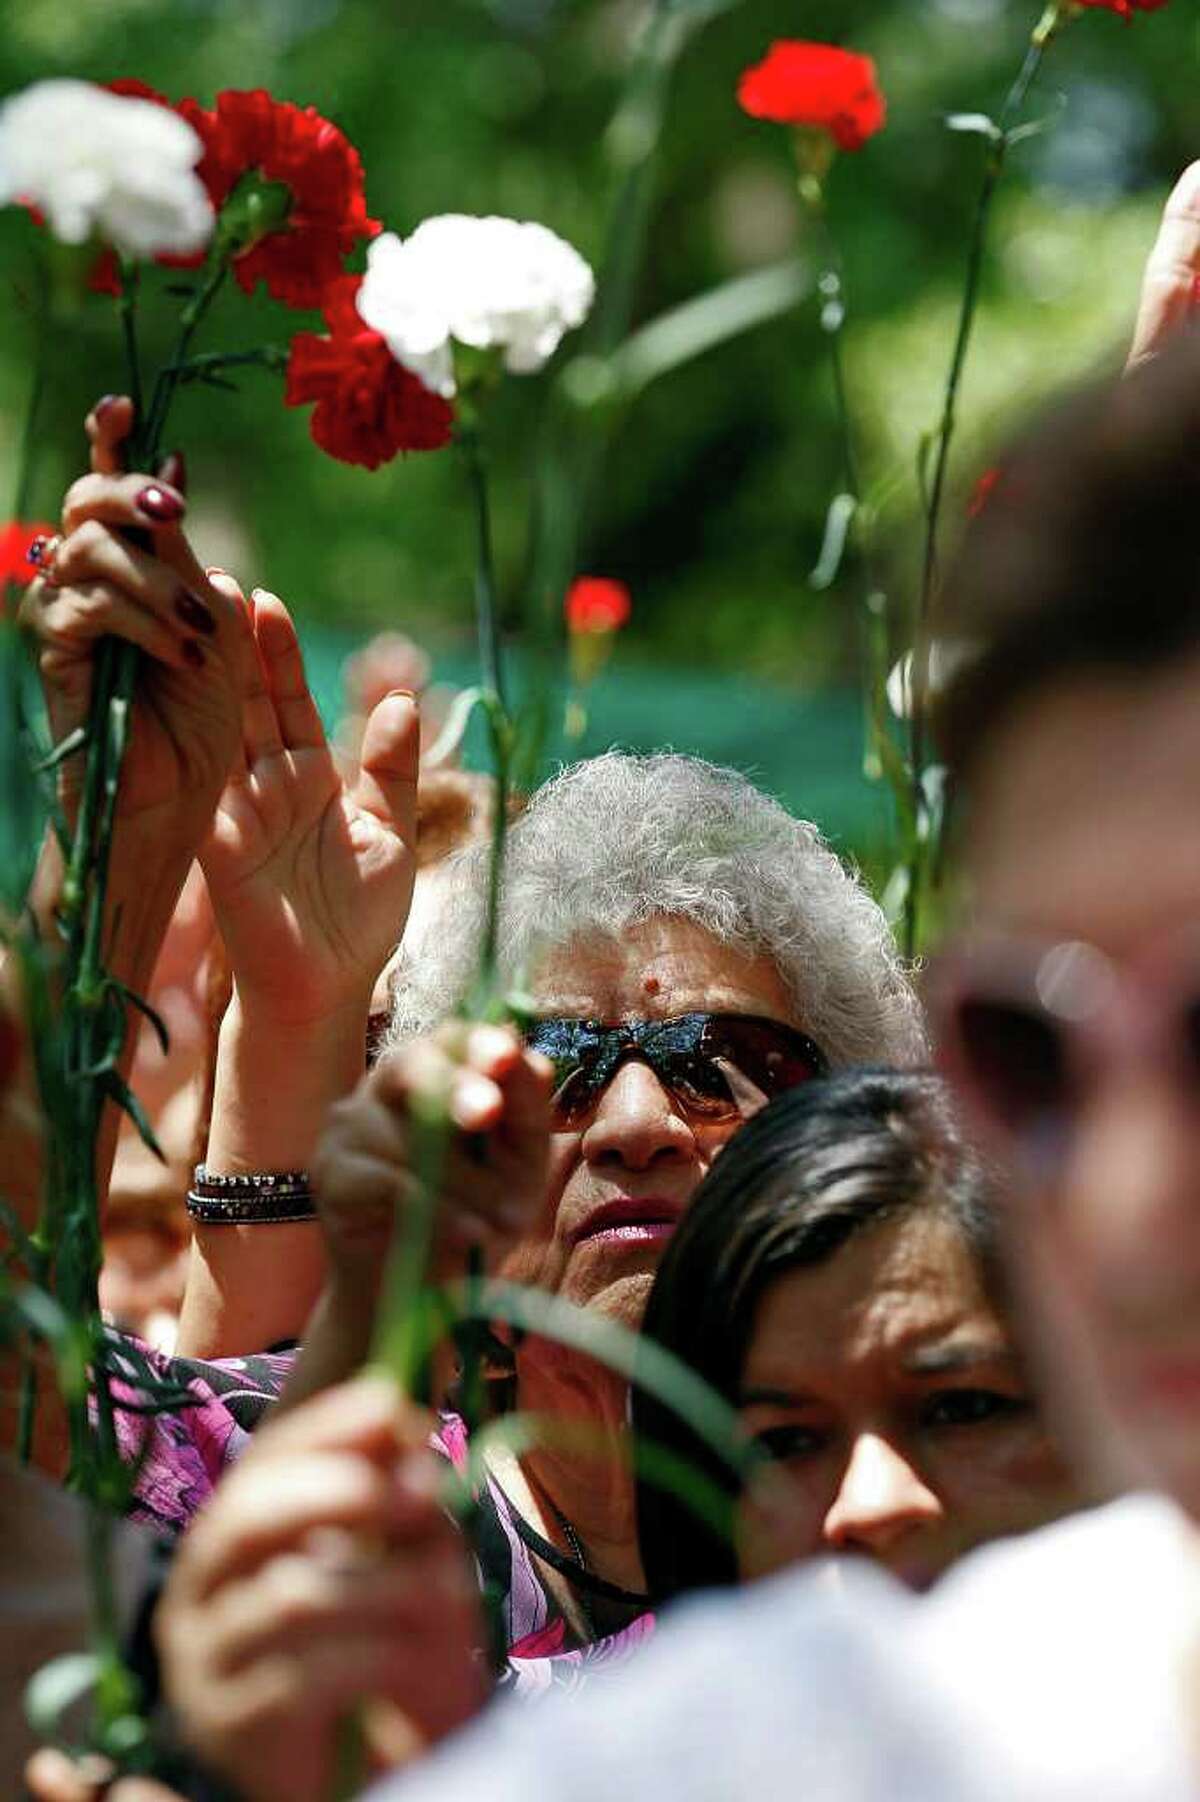 METRO – Alicia Anzaldua Salinas, 74, wearing glasses, holds up her carnation along with other mothers during a blessing after the Mother's Day Mass at Our Lady of Lourdes Grotto, Sunday, May 8, 2011. JERRY LARA/glara@express-news.net